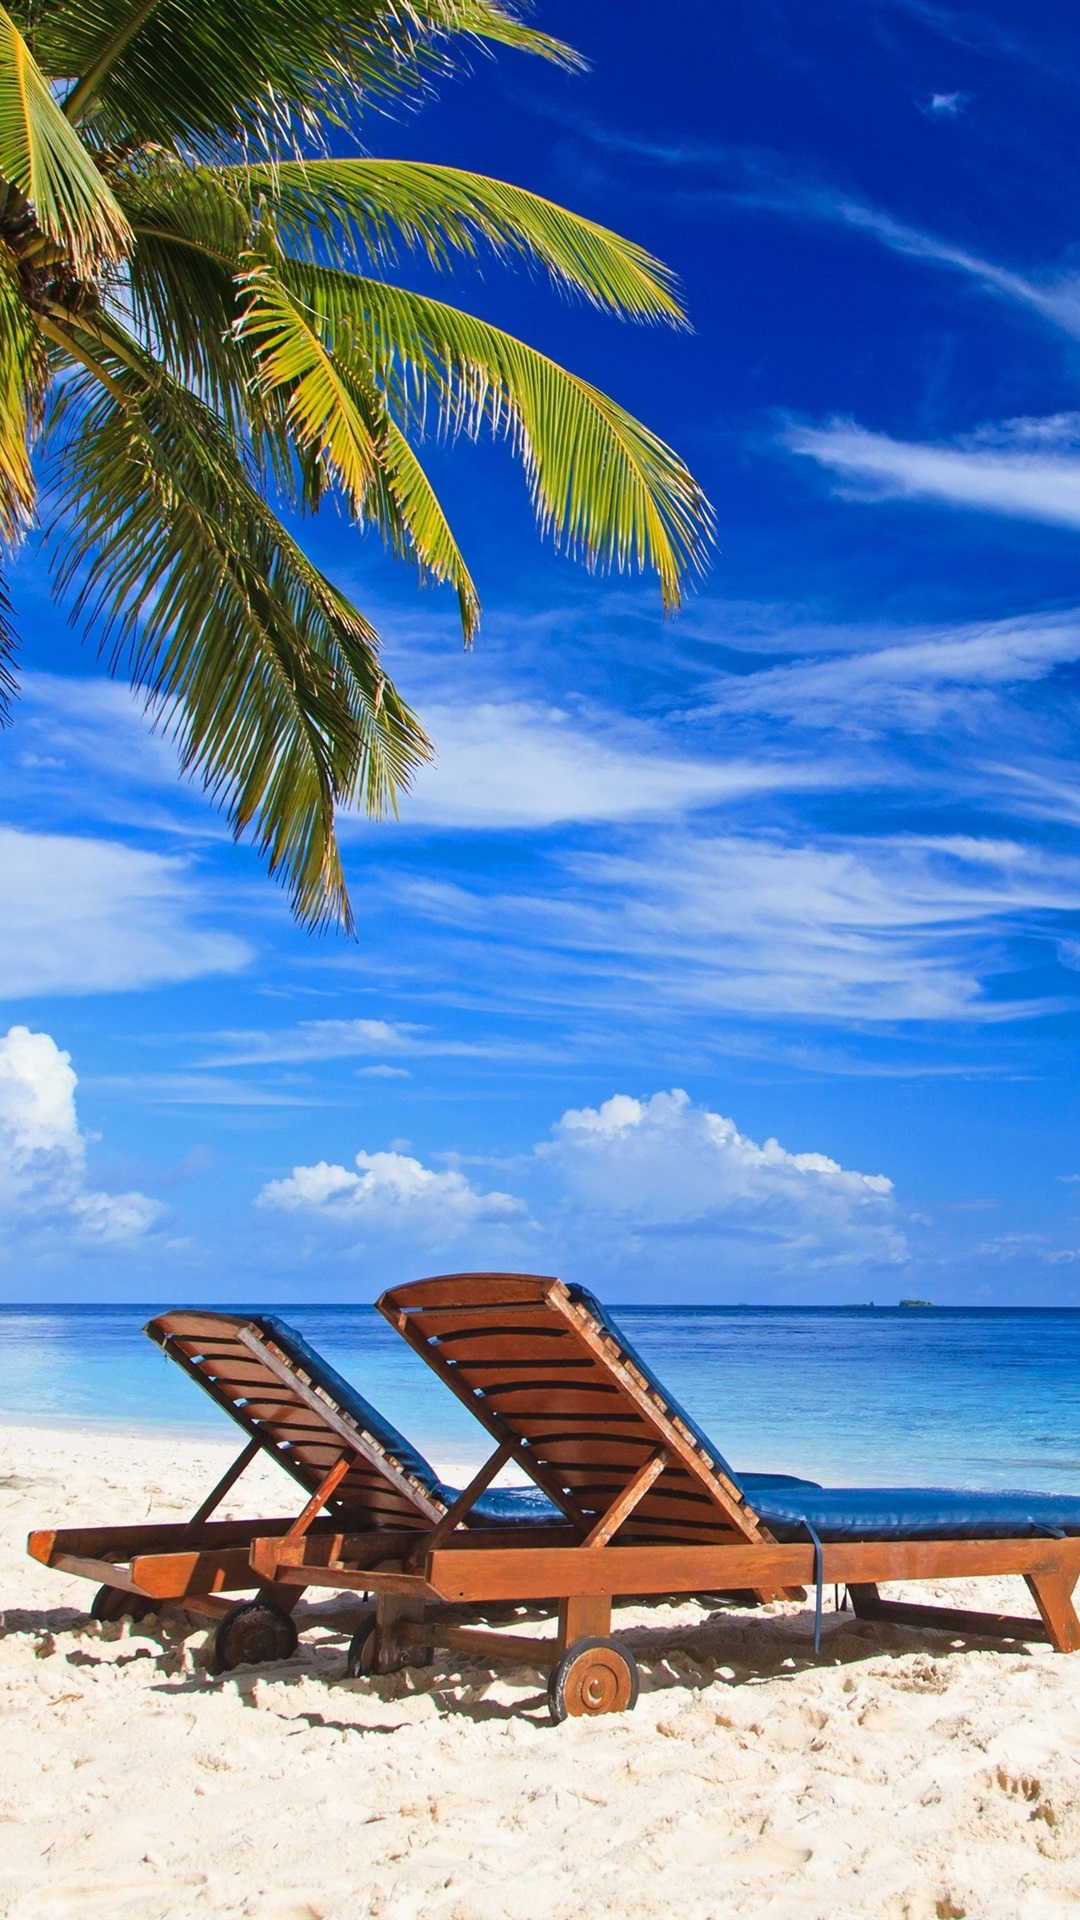 4K Beach Chairs Wallpapers High Quality | Download Free